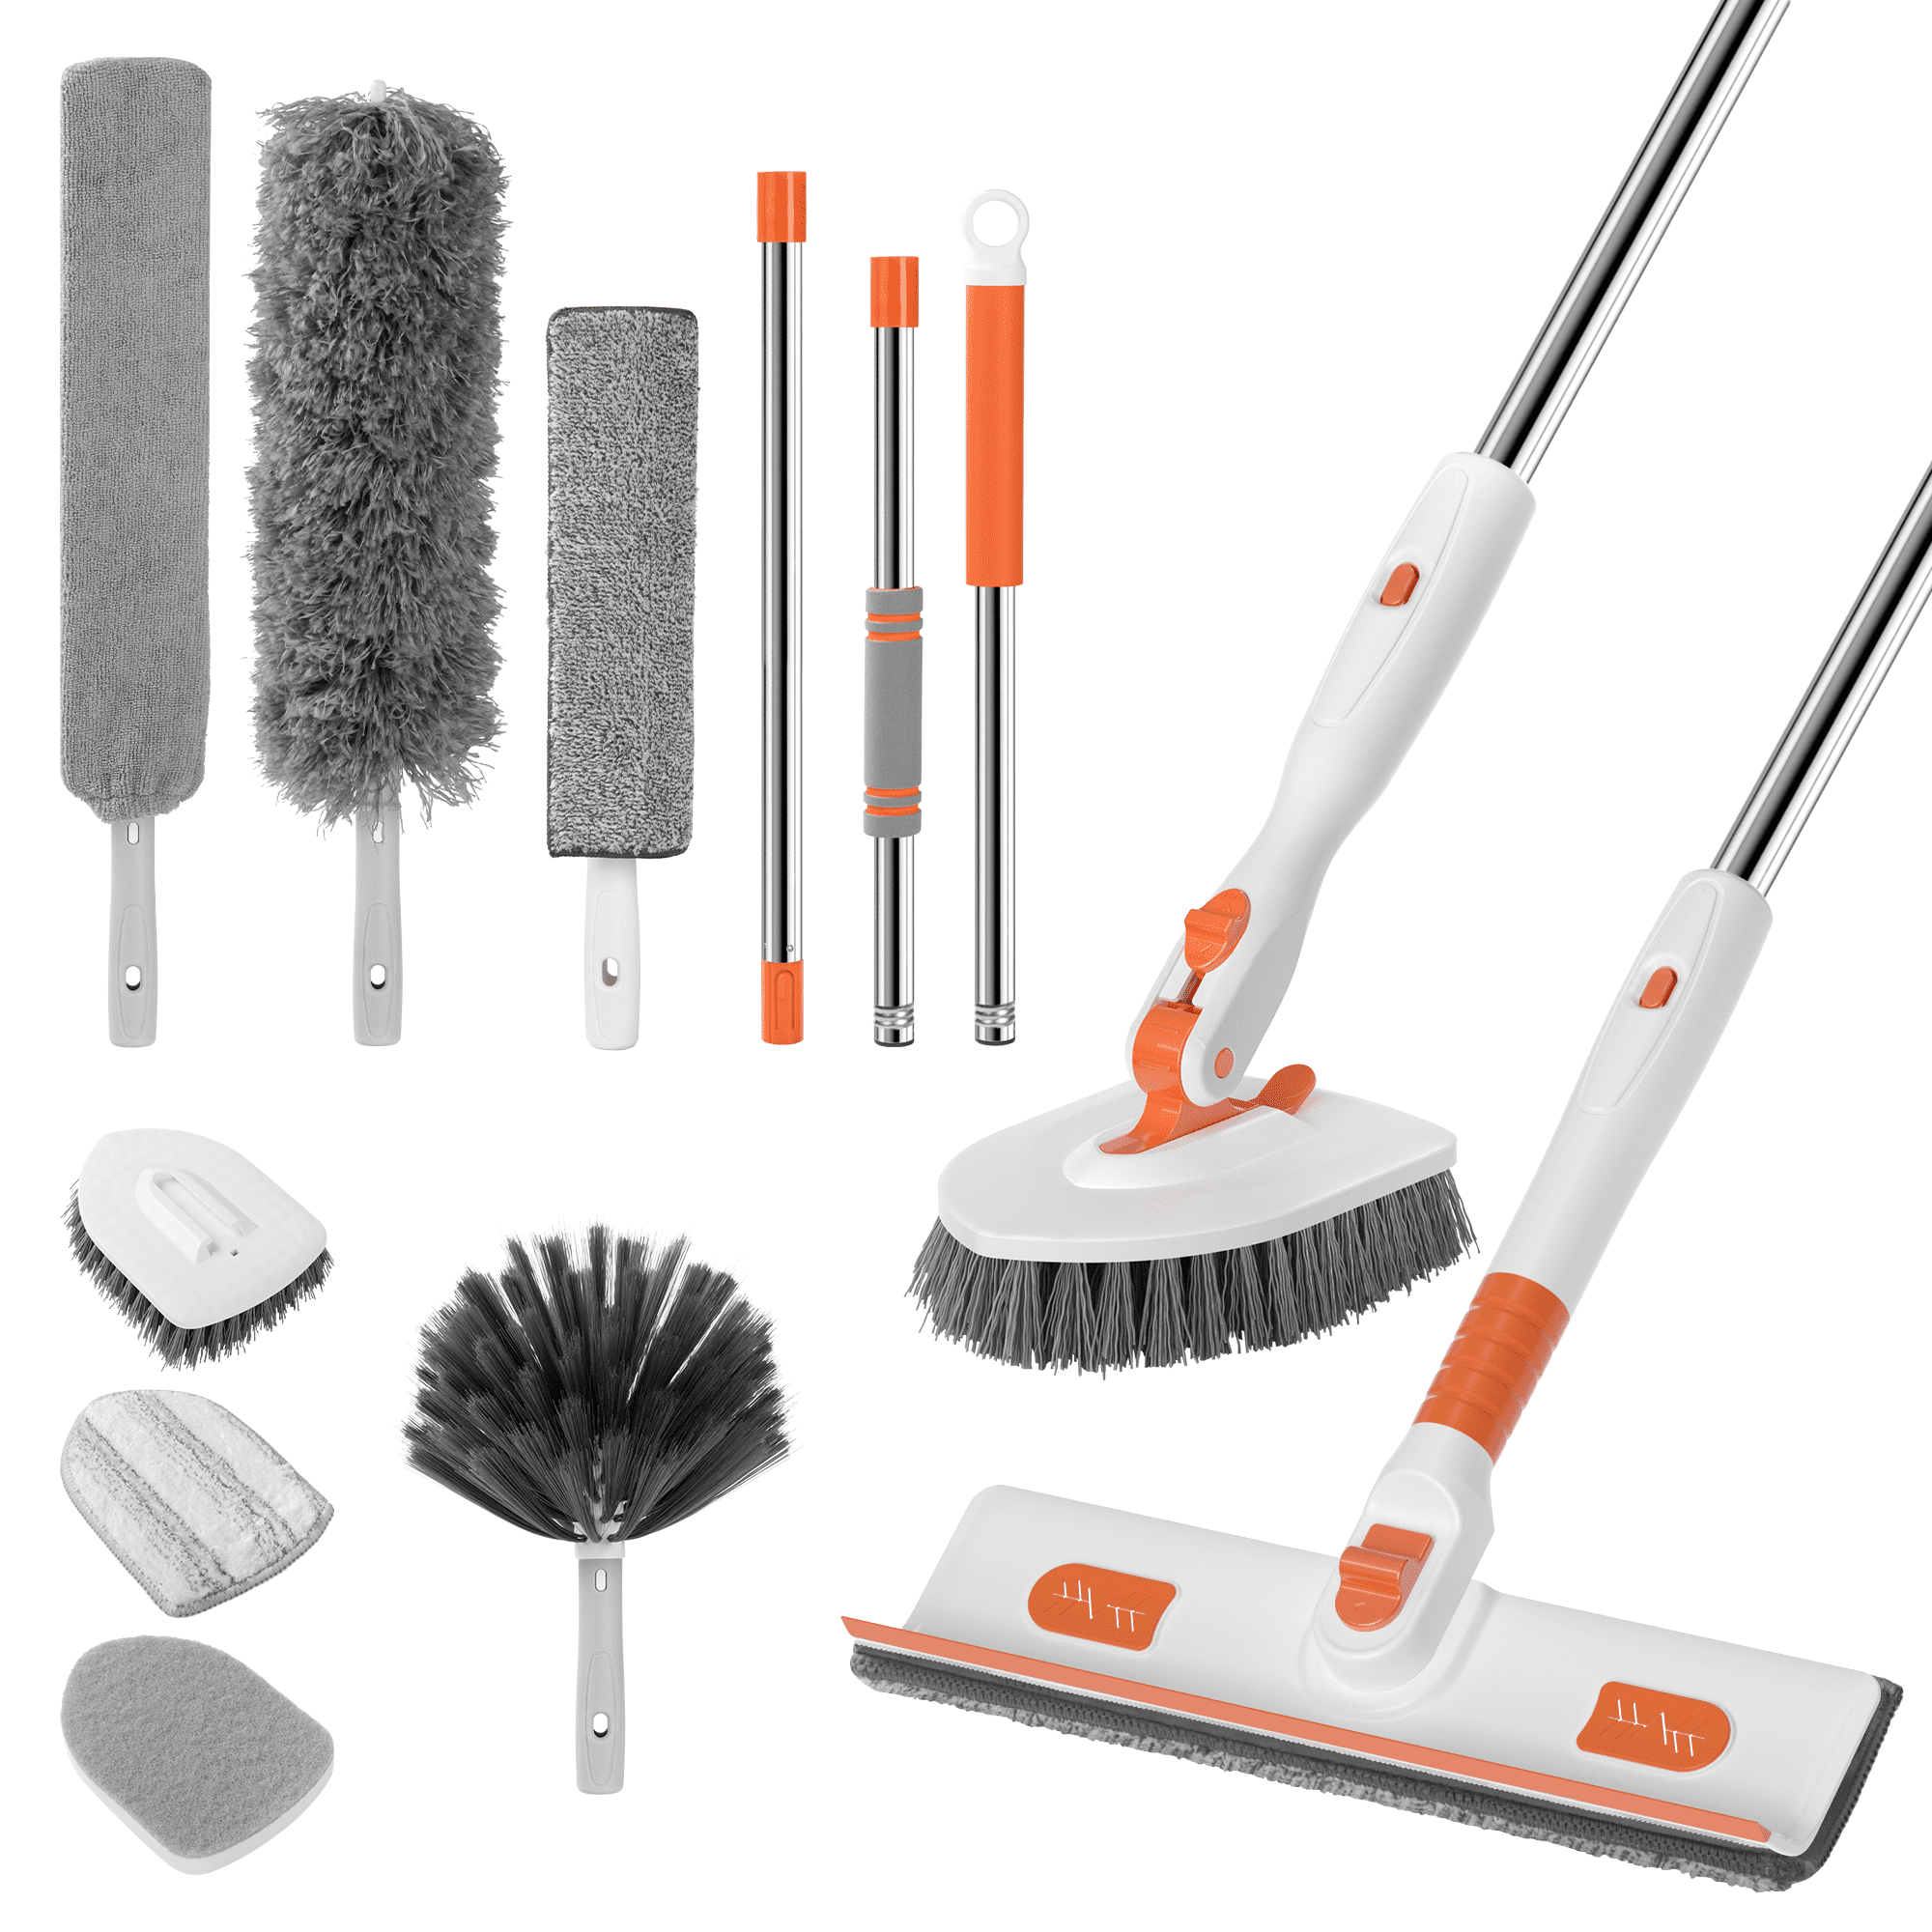 4 PC Hand Sweeper Cleaning Brush Scrubber Brushes Bathroom Multi Purpose Kitchen